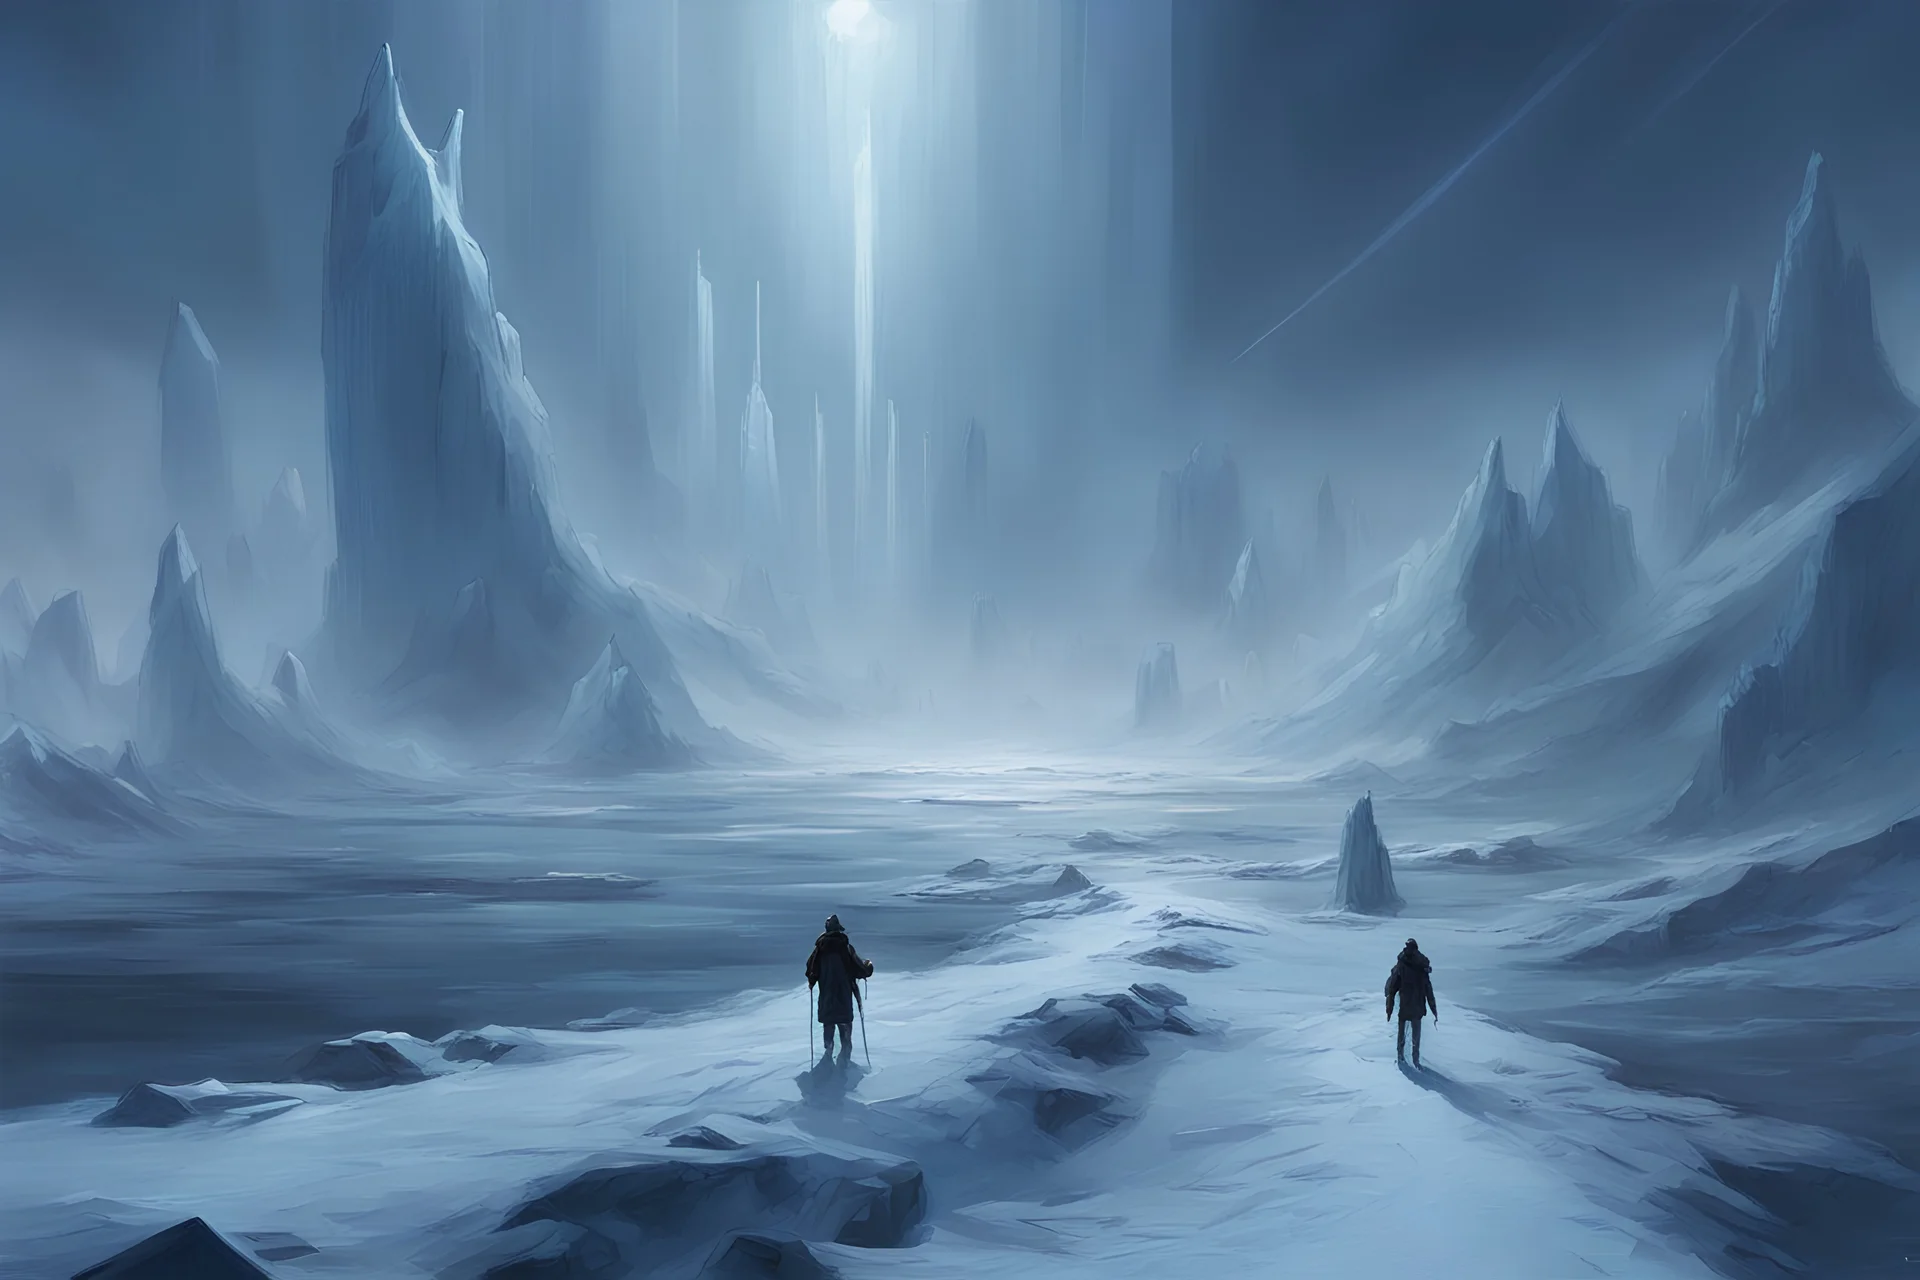 ice, night, rimbel35 youtube channel influence, very epic and concept art, winter, sci-fi, futurism influence, winter, friedrich eckenfelder and jenny montigny impressionism paintings